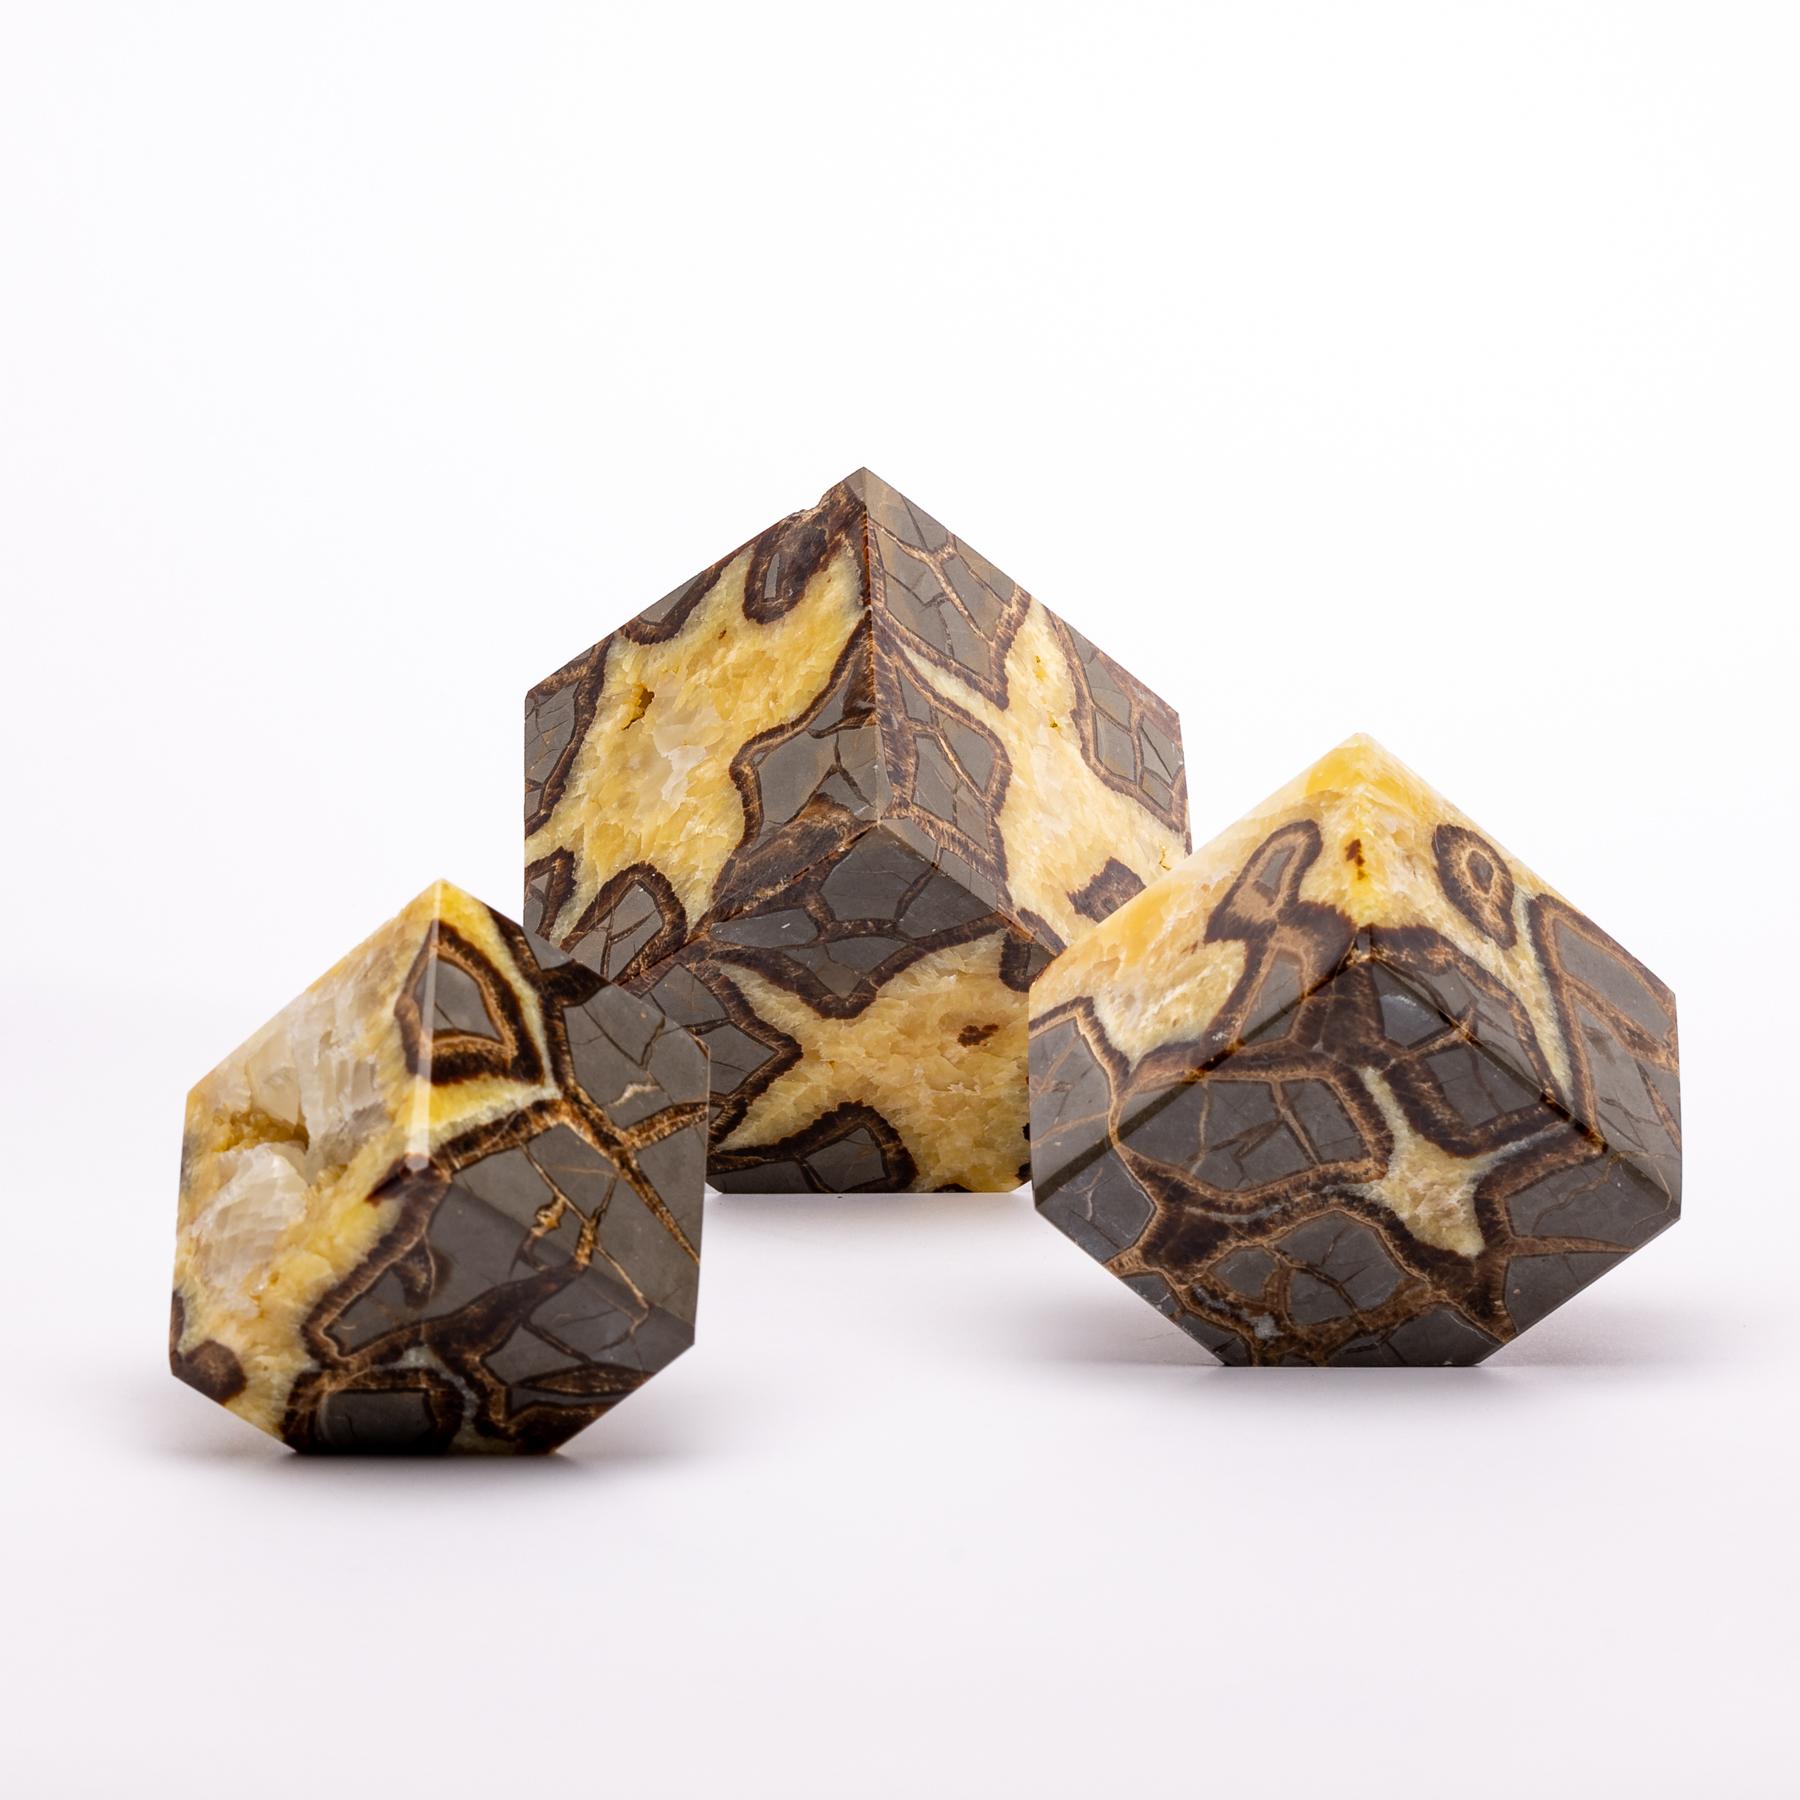 Very decorative set of three septarian cubes from Madagascar
Sizes:
3